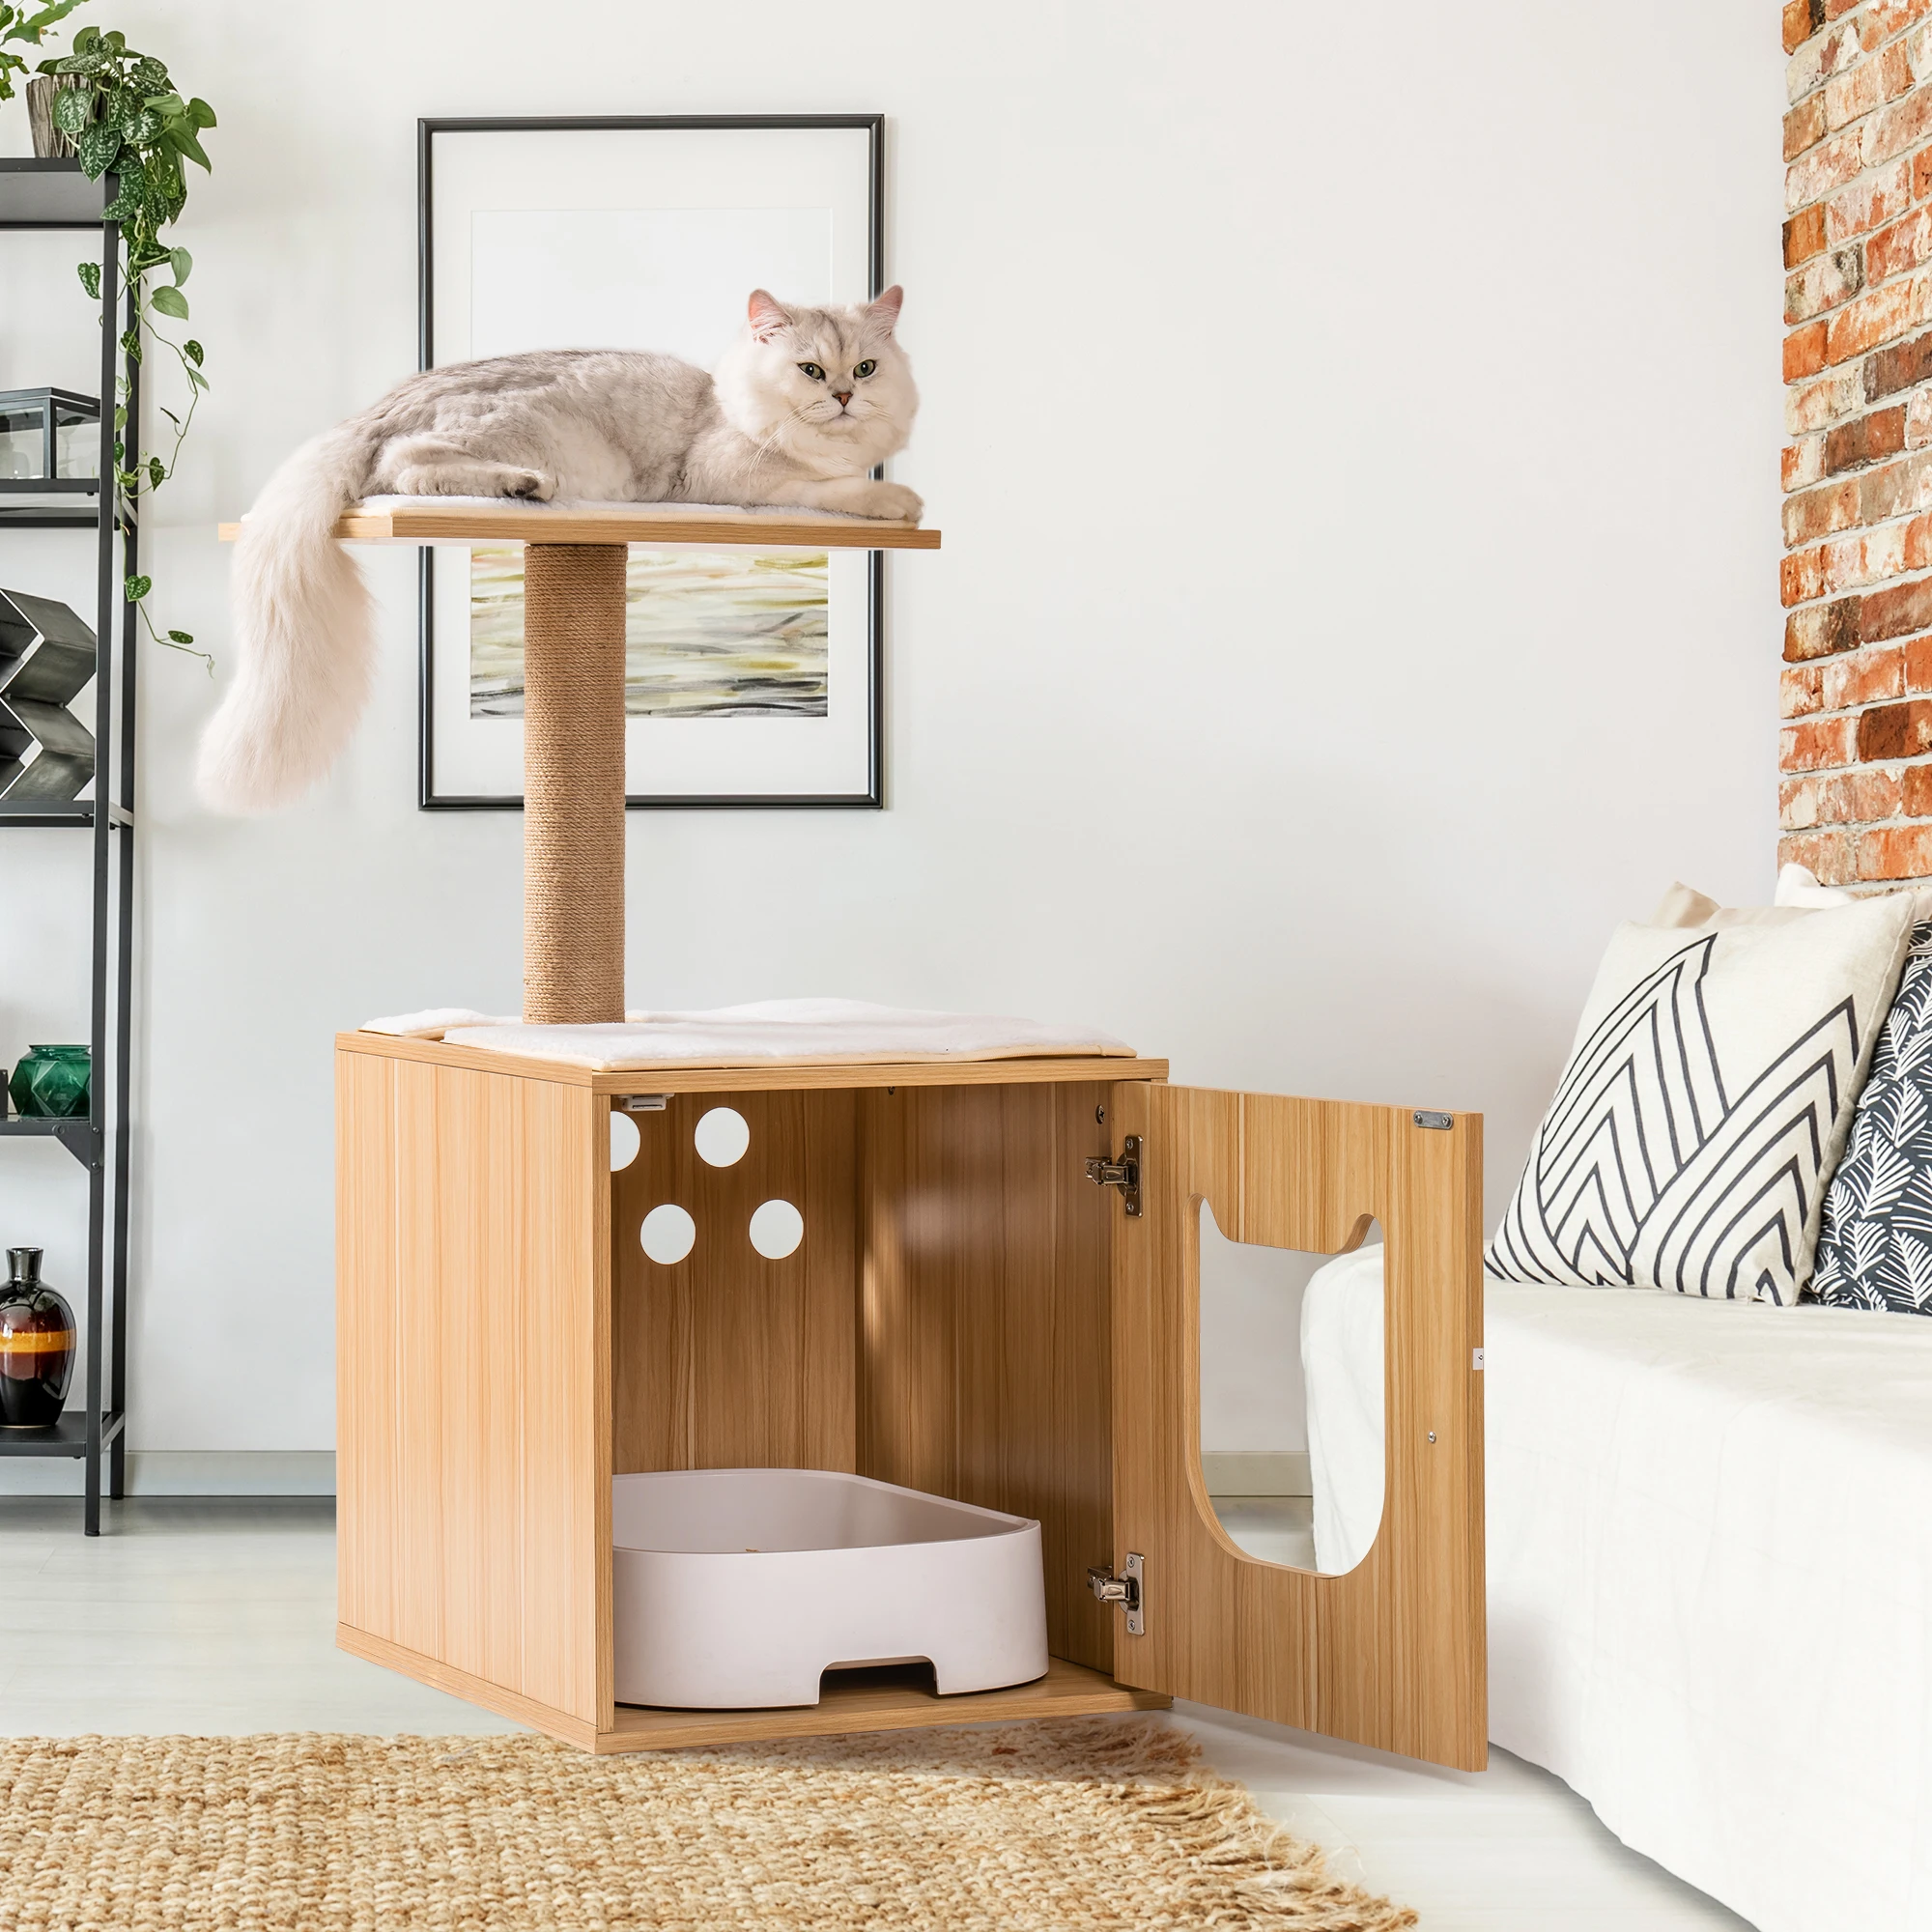 MEWOOFUN Wooden Cat House with Cat Bed Hidden Cat Washroom Furniture Cat Tree with Scratching Post Cat Litter Box Enclosure 6